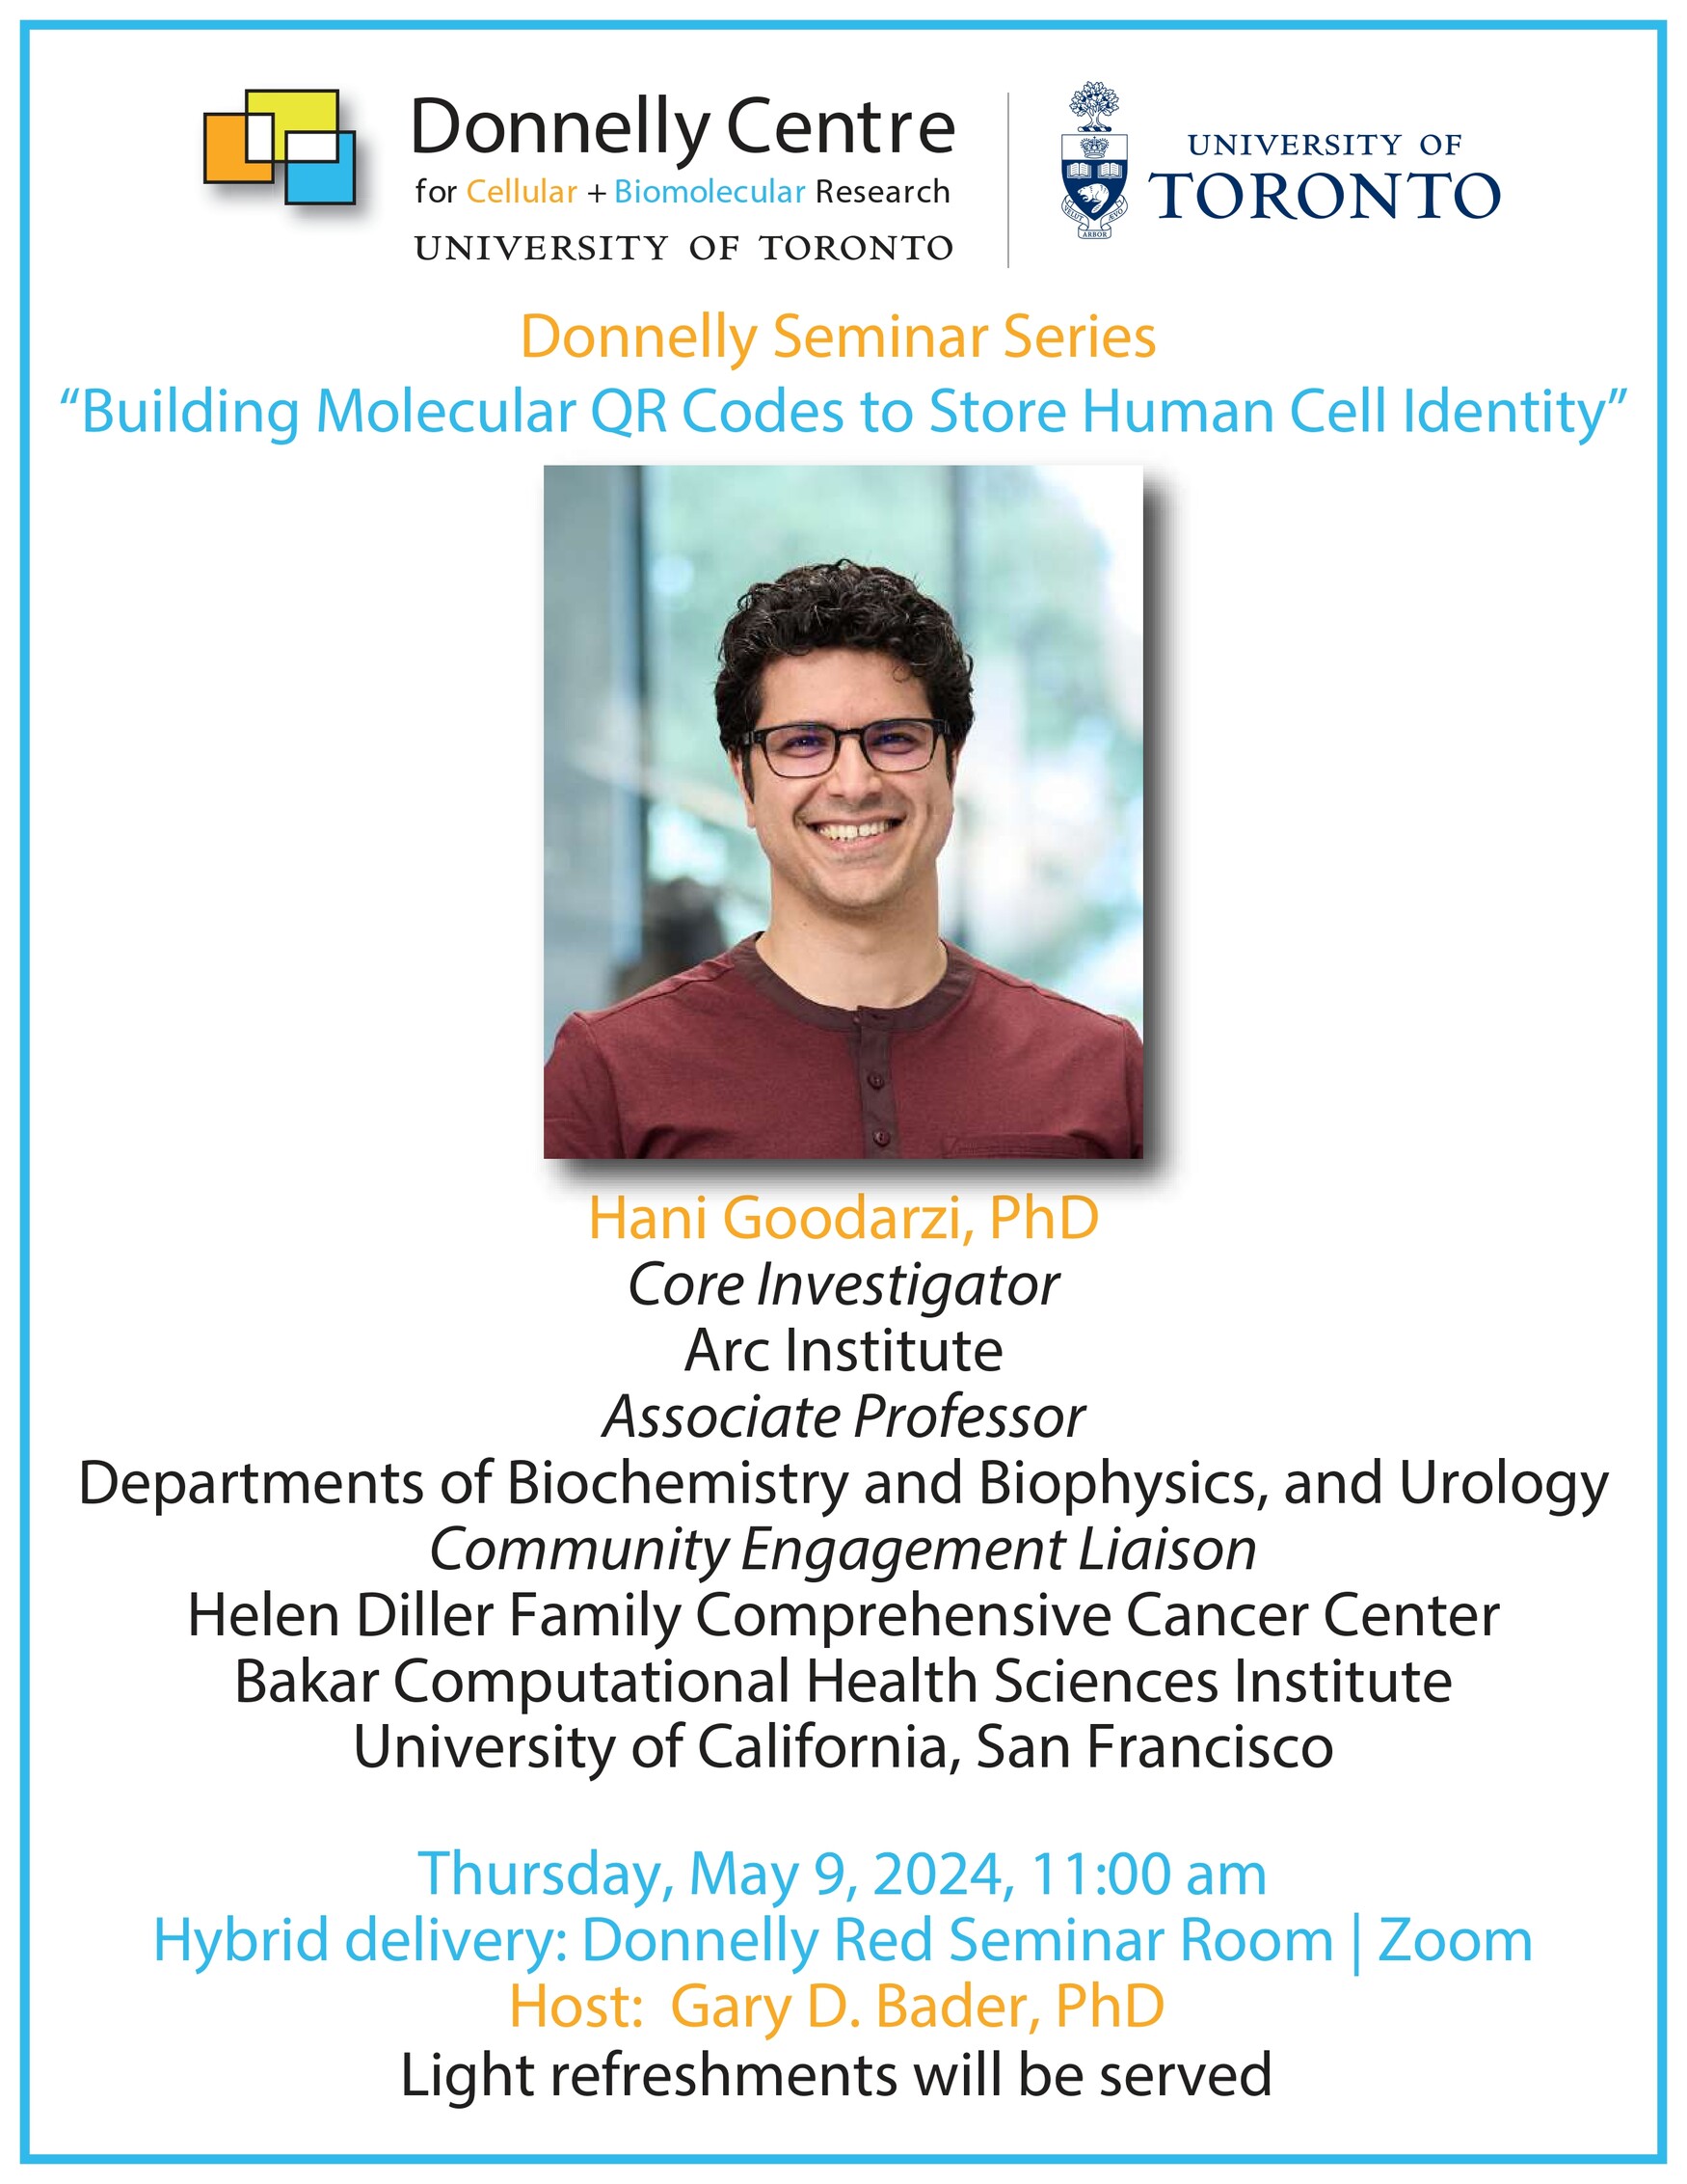 Poster for Donnelly Centre Seminar on "Building molecular QR codes"